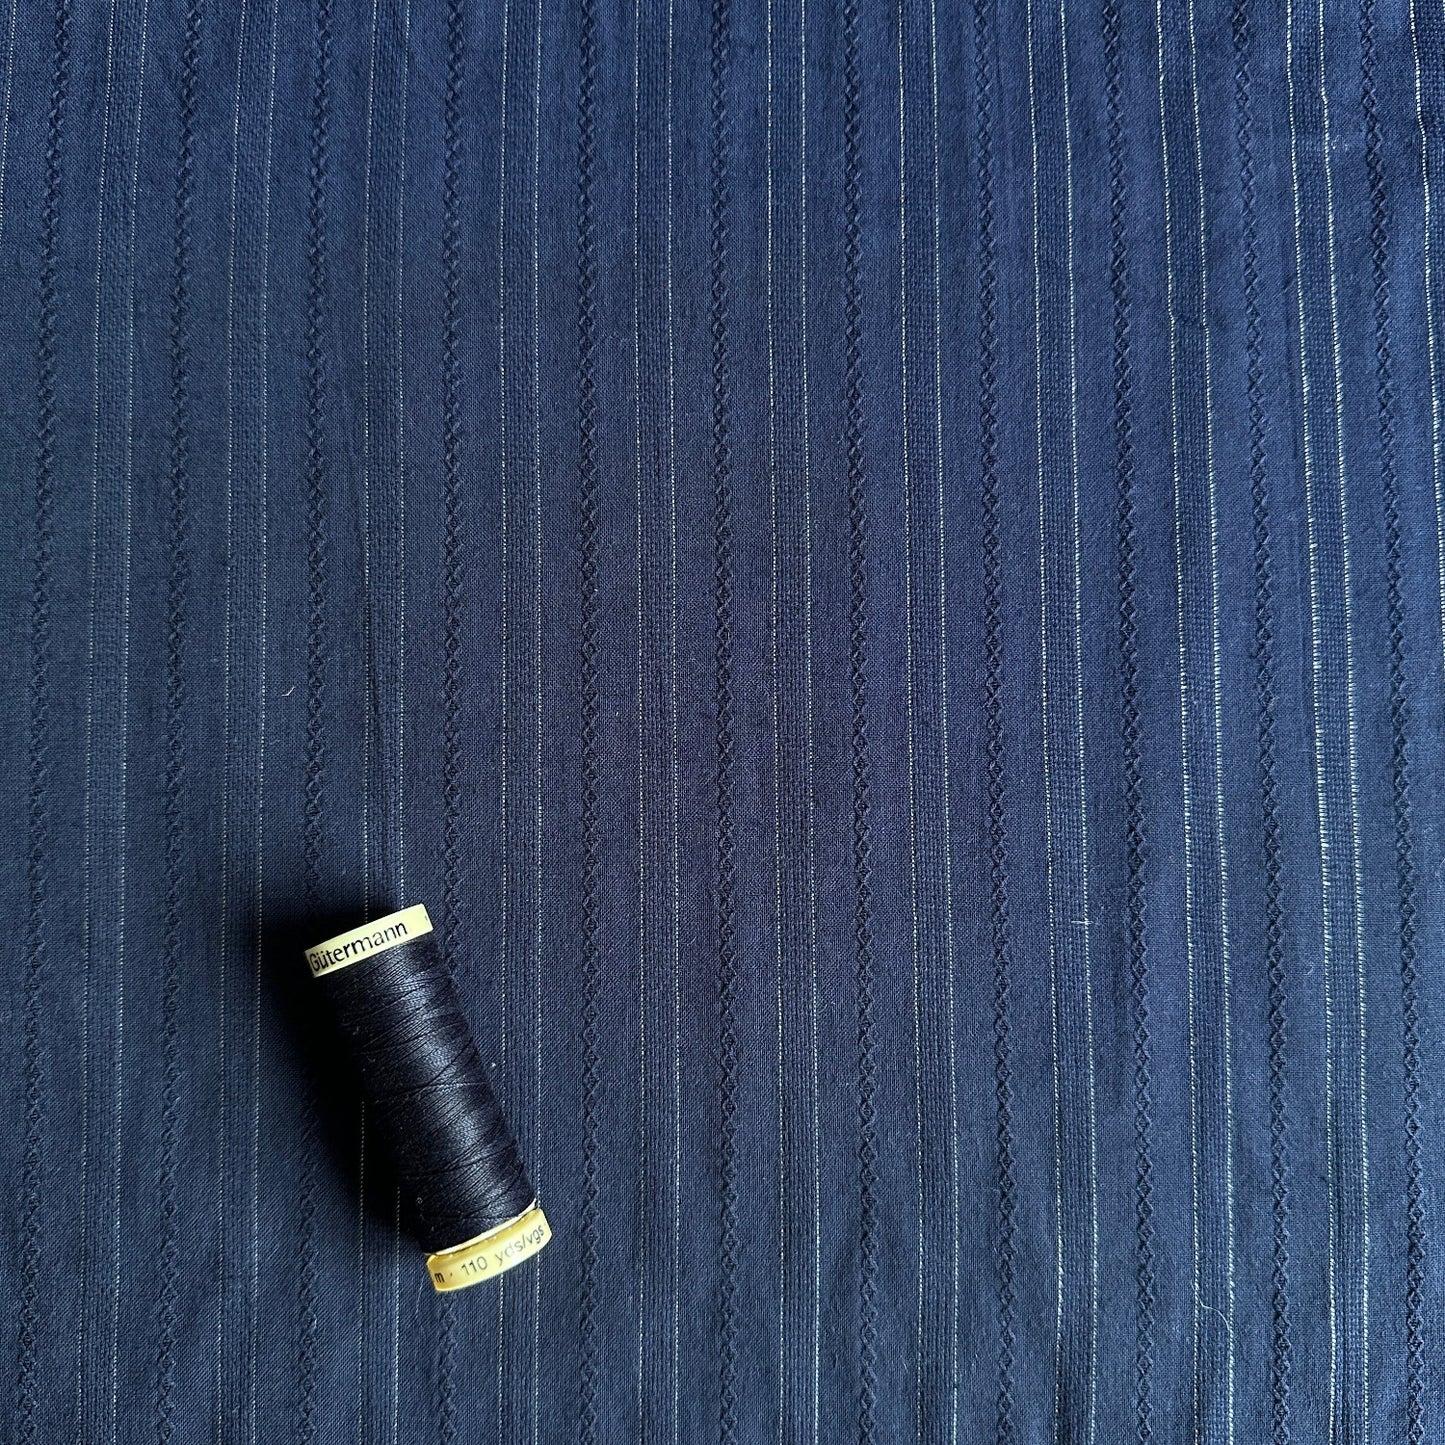 Embroidered Glittery Stripe Cotton Fabric in Navy